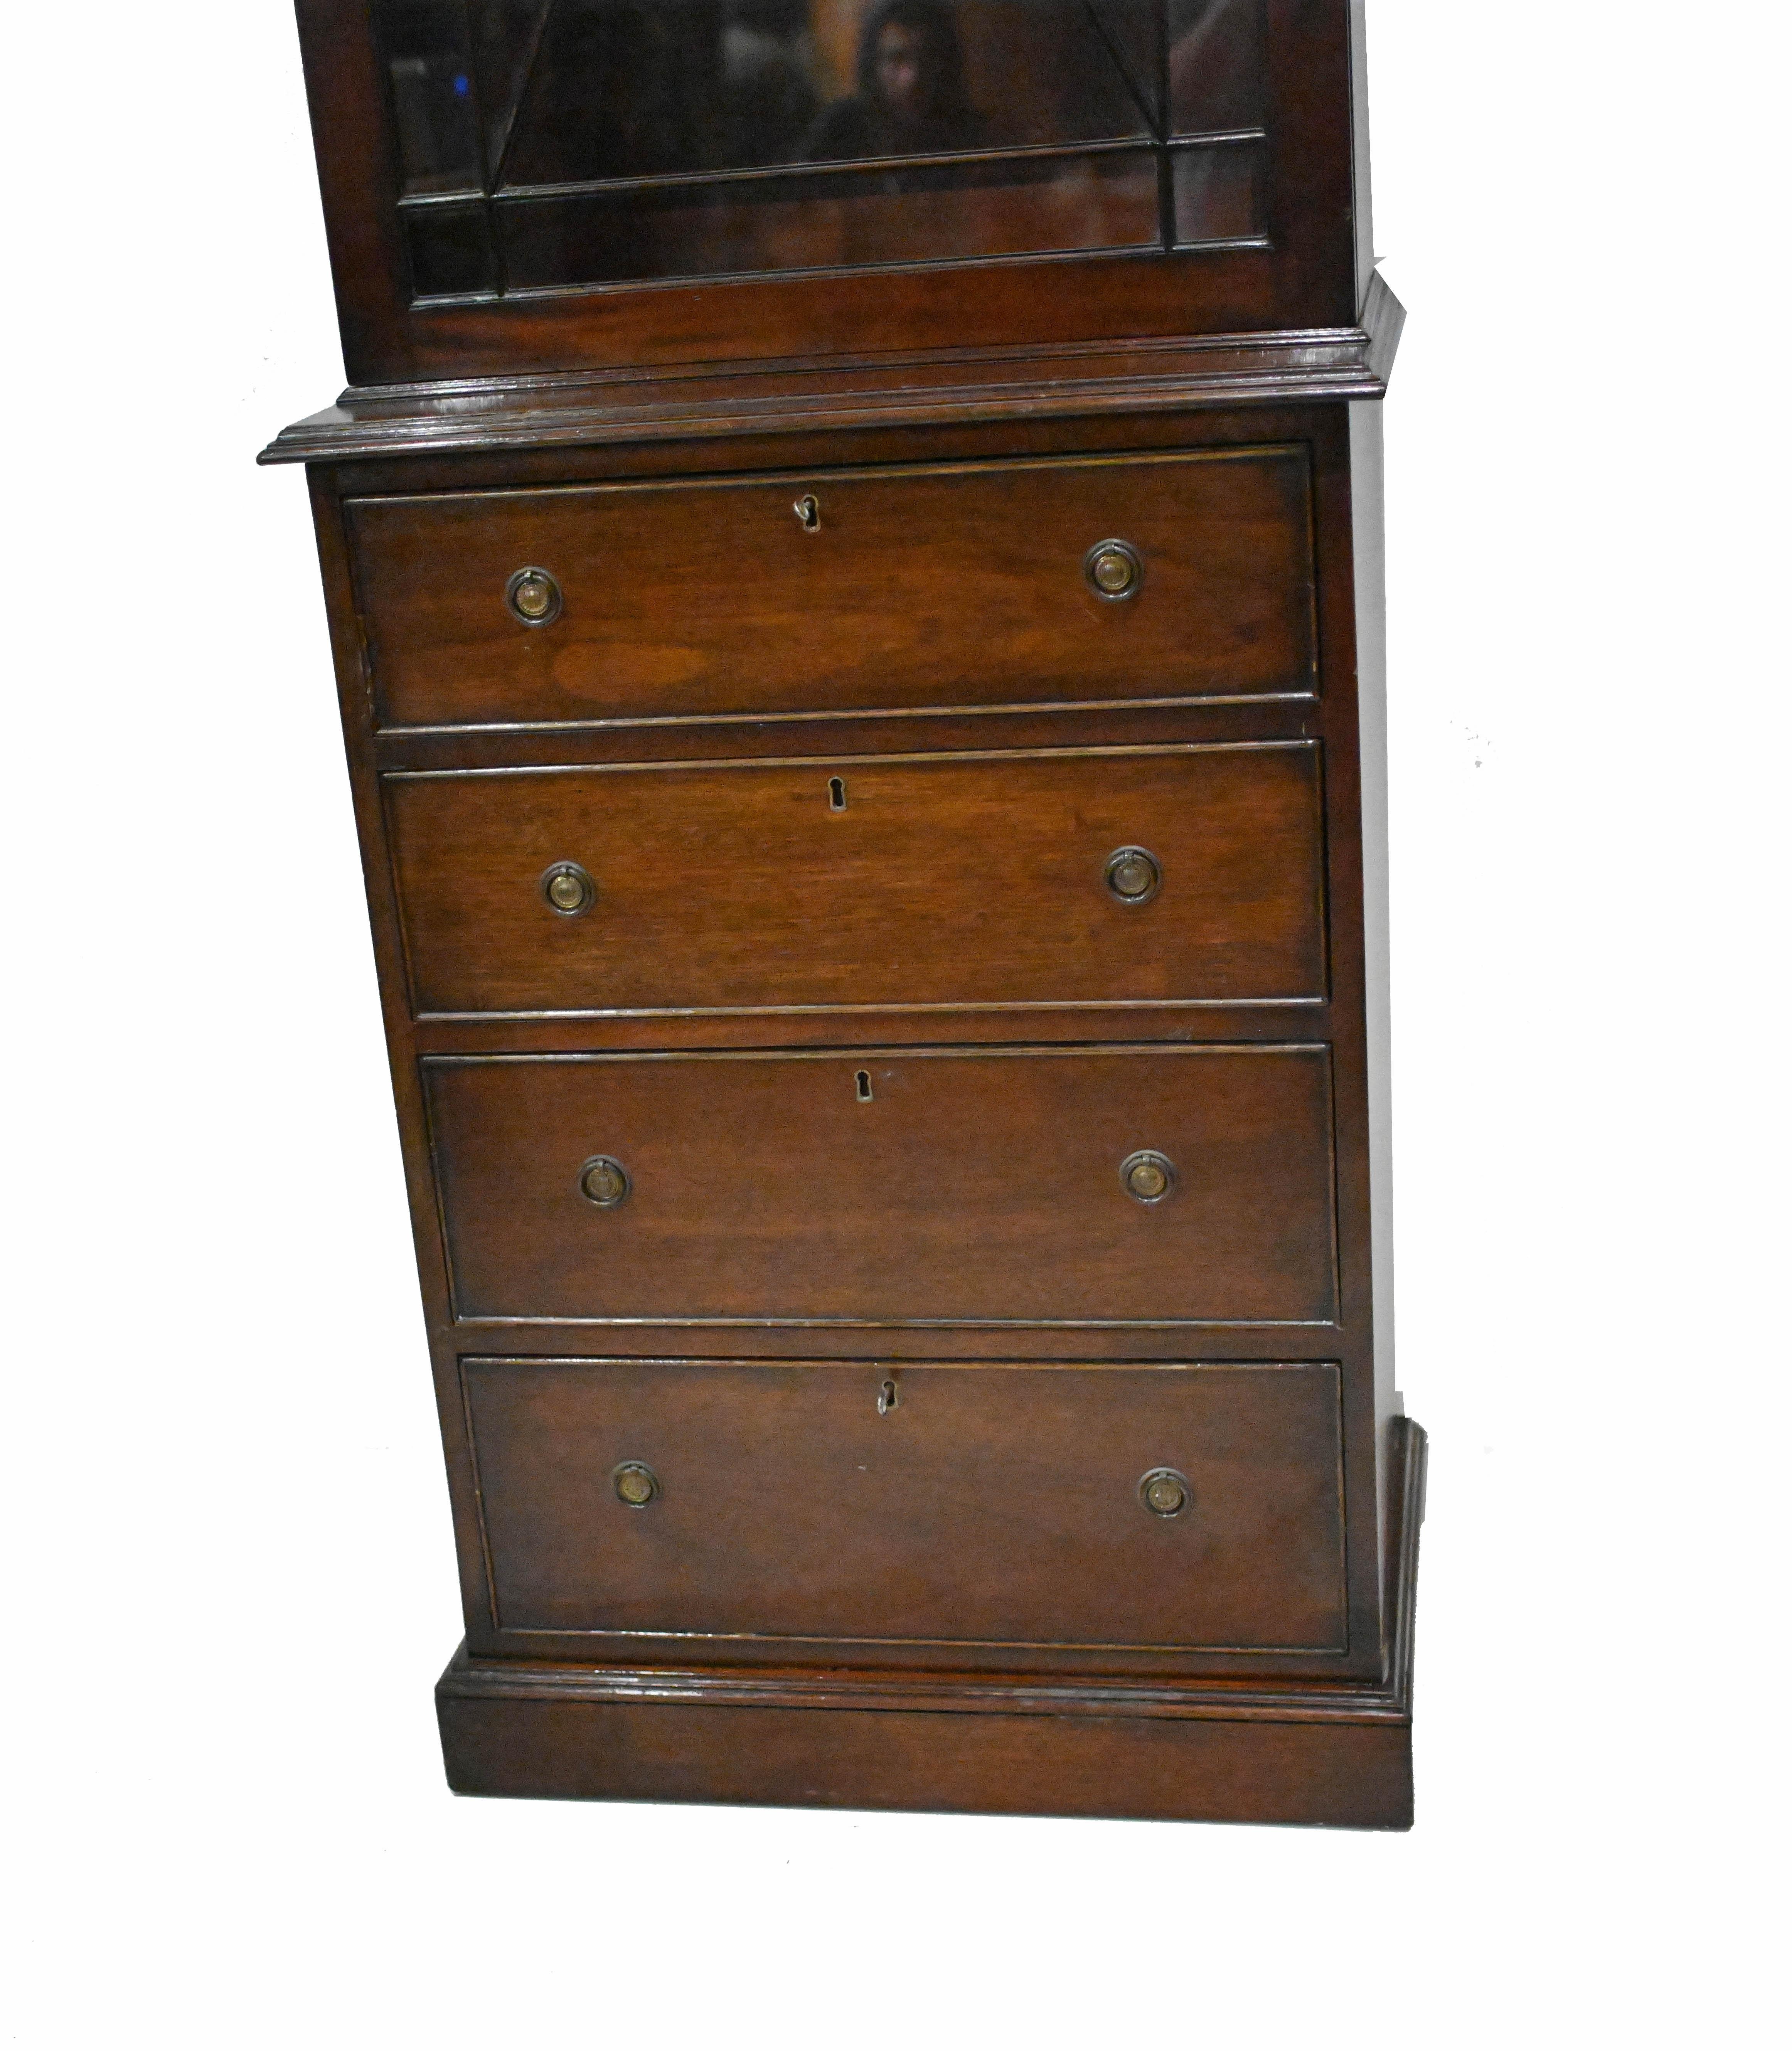 Period Georgian bookcase with single door
Also functions as a display cabinet with top half being glass fronted
Hand crafted from mahogany and a lovely period antique
Offered in great condition ready for home use right away
Will ship to anywhere in